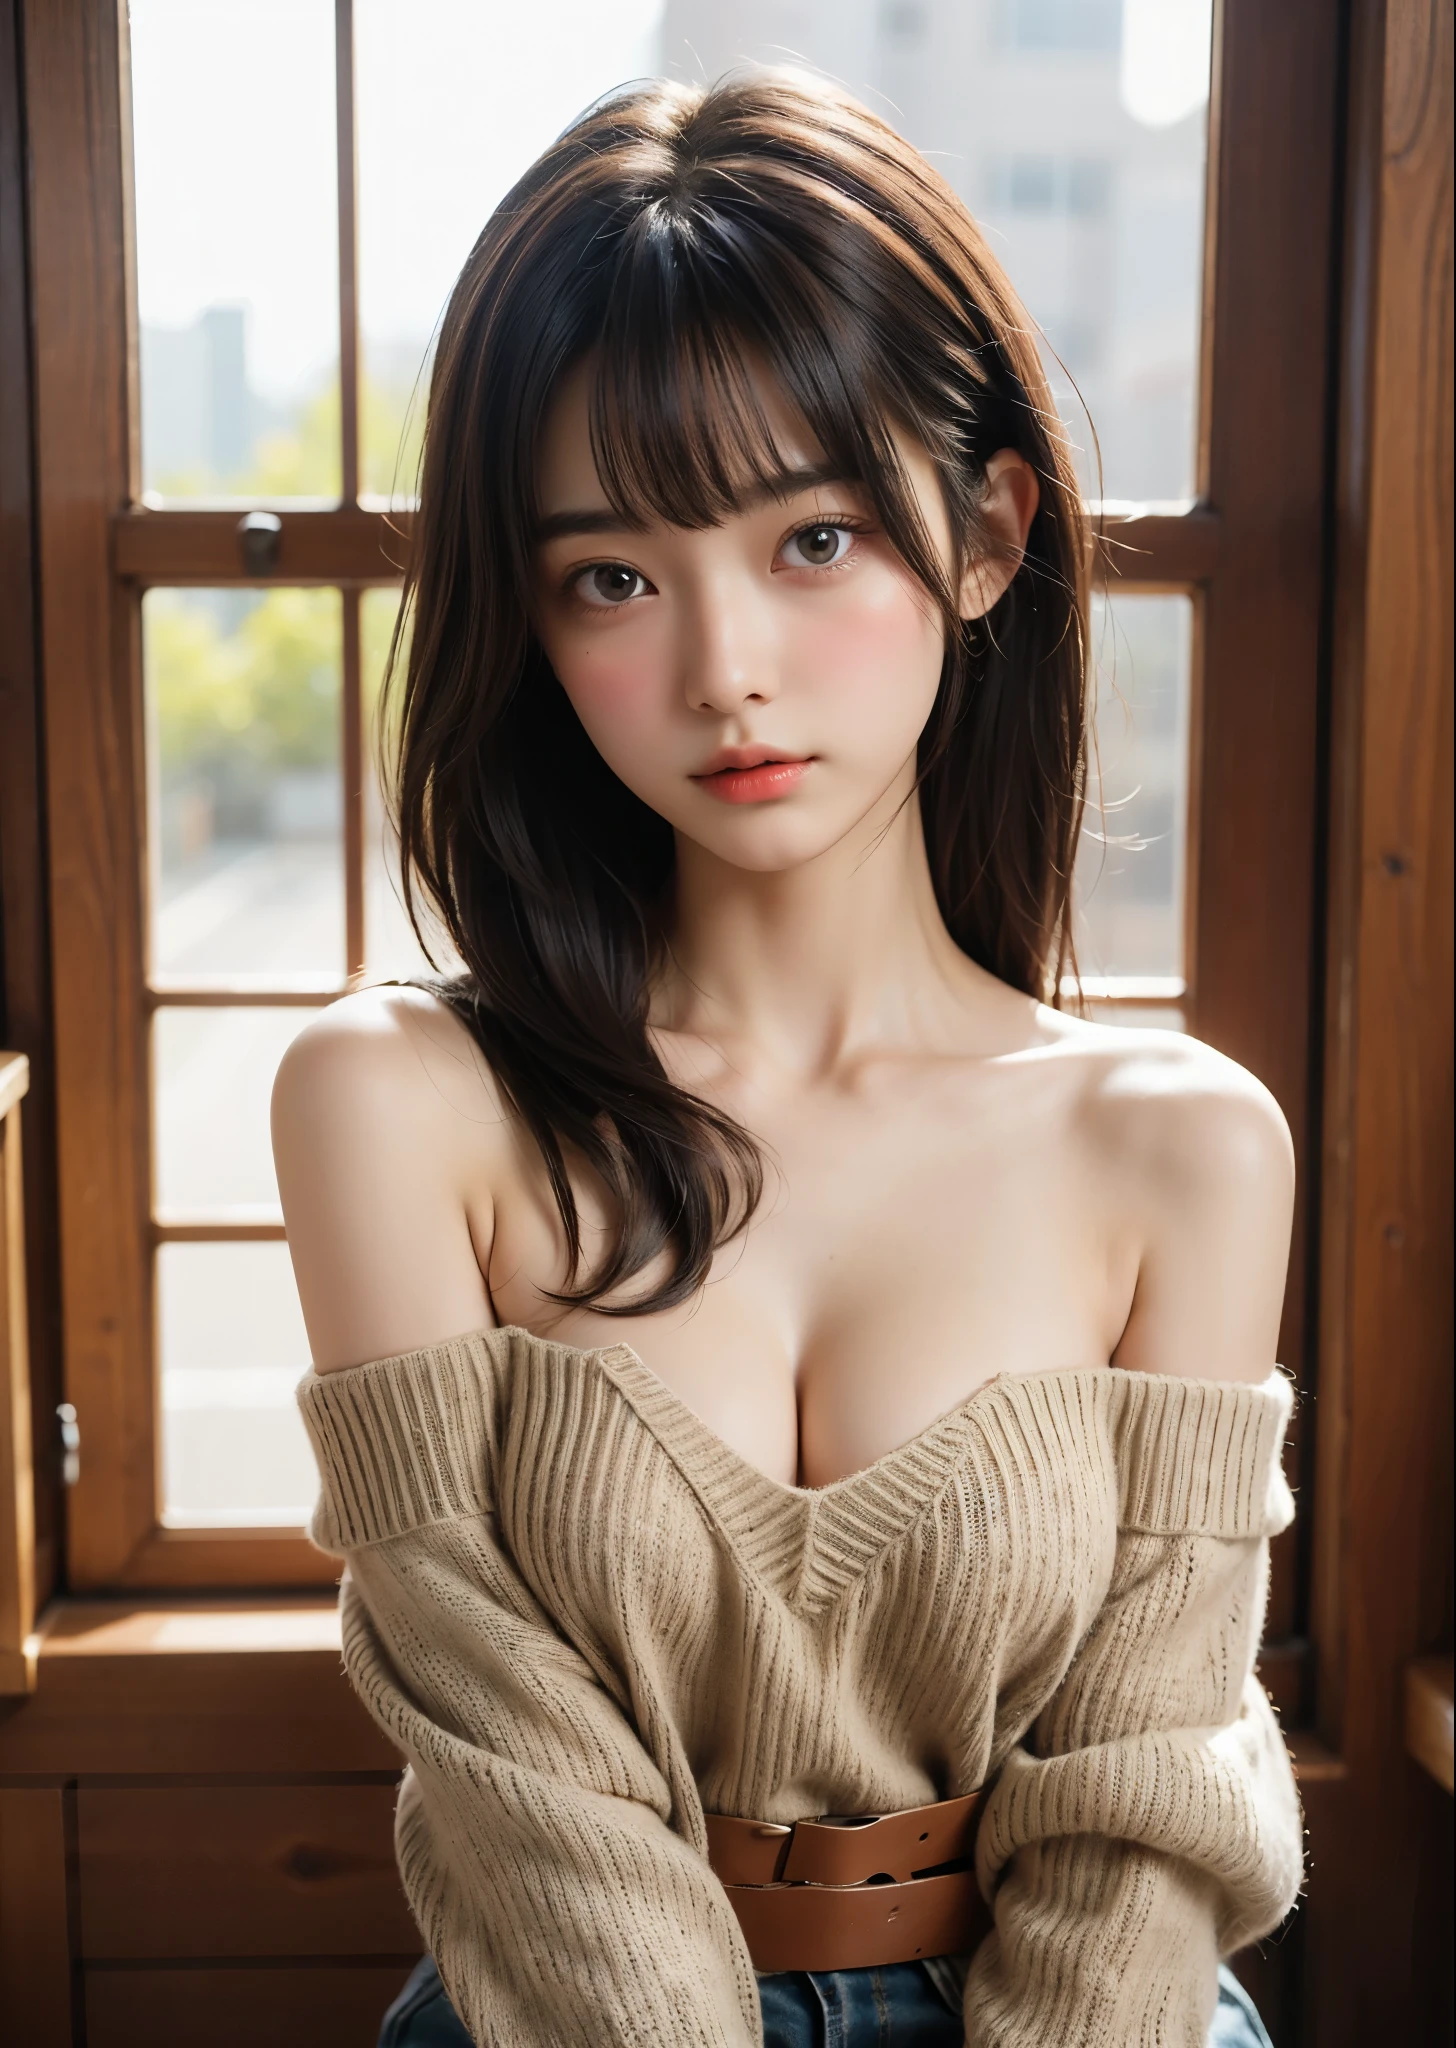 (((Waist up shot)))、(((Straight hair with brown bangs)))、(((On a light indoor background with wooden framed glass windows.)))、(((Lemon Chiffon off-shoulder sweater、Cleavage is not visible)))、very cute、Half Japan, Half Korean、18-year-old girl、Smooth Skin、Light eye makeup、Shiny, Ultra-realistic faces、Subtle lighting effects、 Ultra-Realistic Capture、Very detailed、High resolution 16K、Skin texture must be natural、skin is healthy、Even Tone、Use natural light and color、Worn out, High quality photos taken by modeling agencies